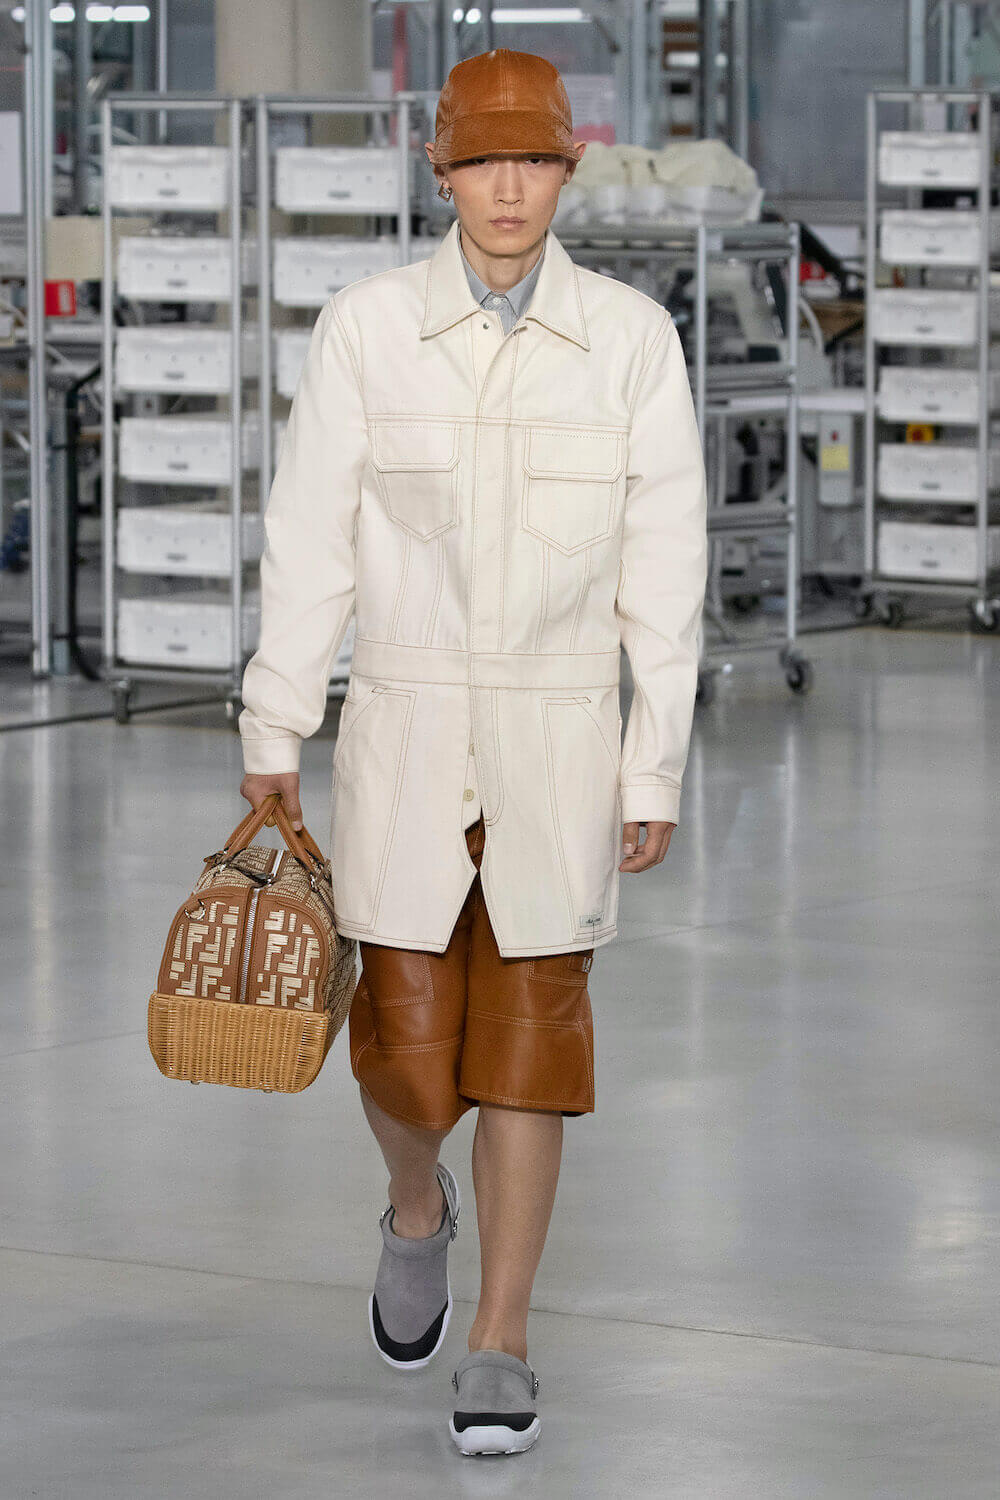 Riri for Louis Vuitton & LFW Men's and Pitti Uomo SS24: What's in